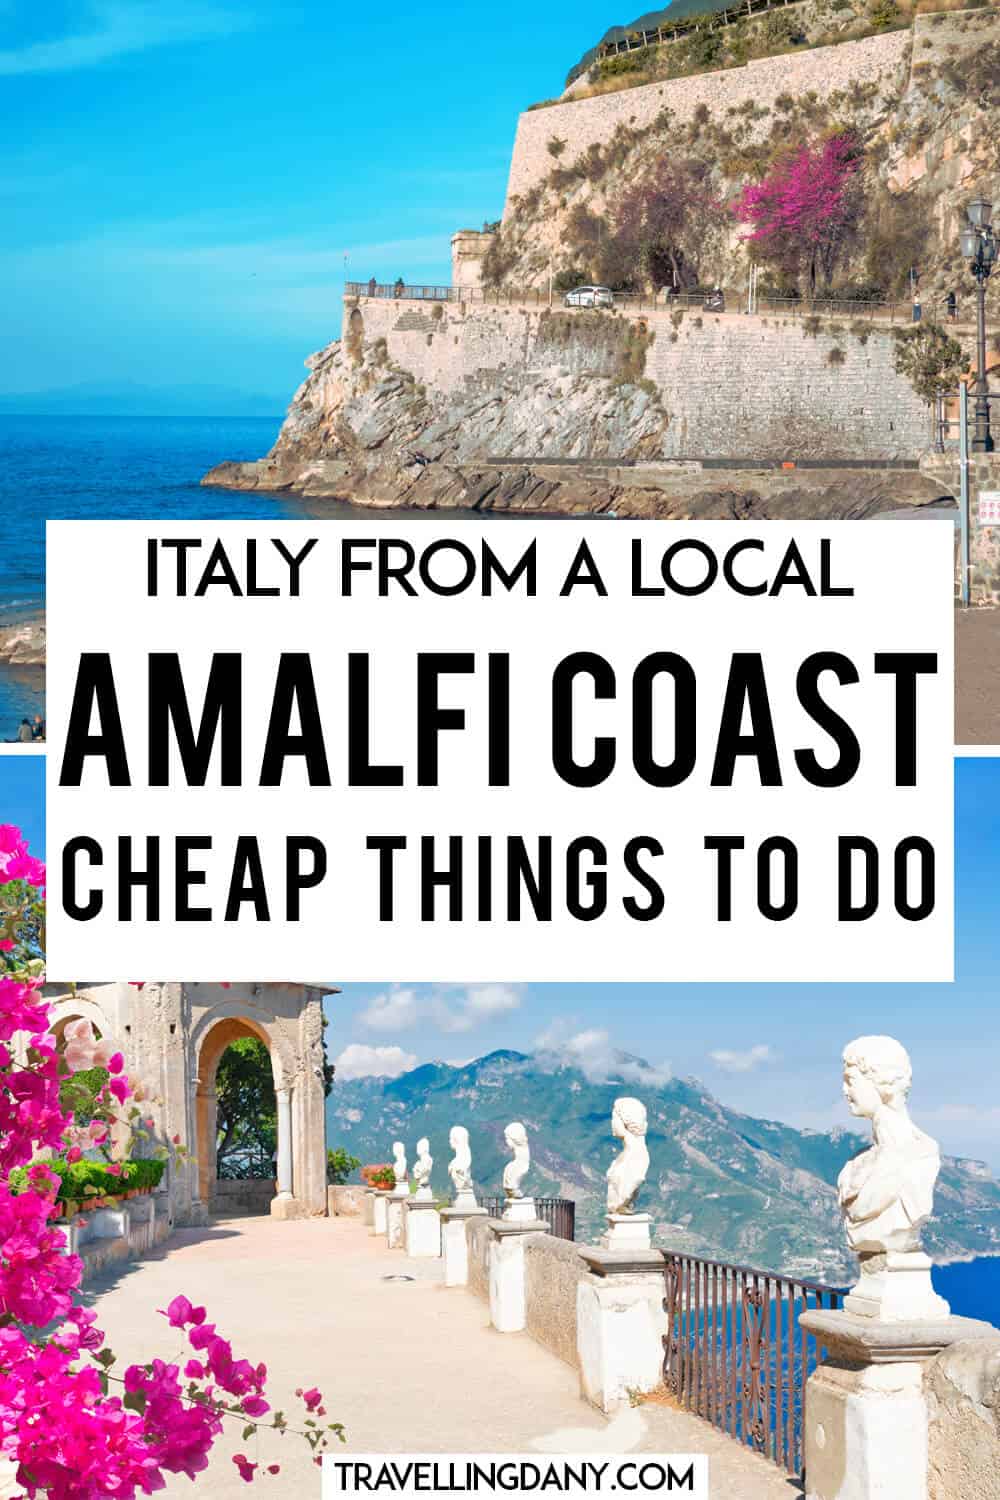 If you are planning your Italy dream trip, check out these things to do on the Amalfi Coast like a local. You’ll absolutely love them!